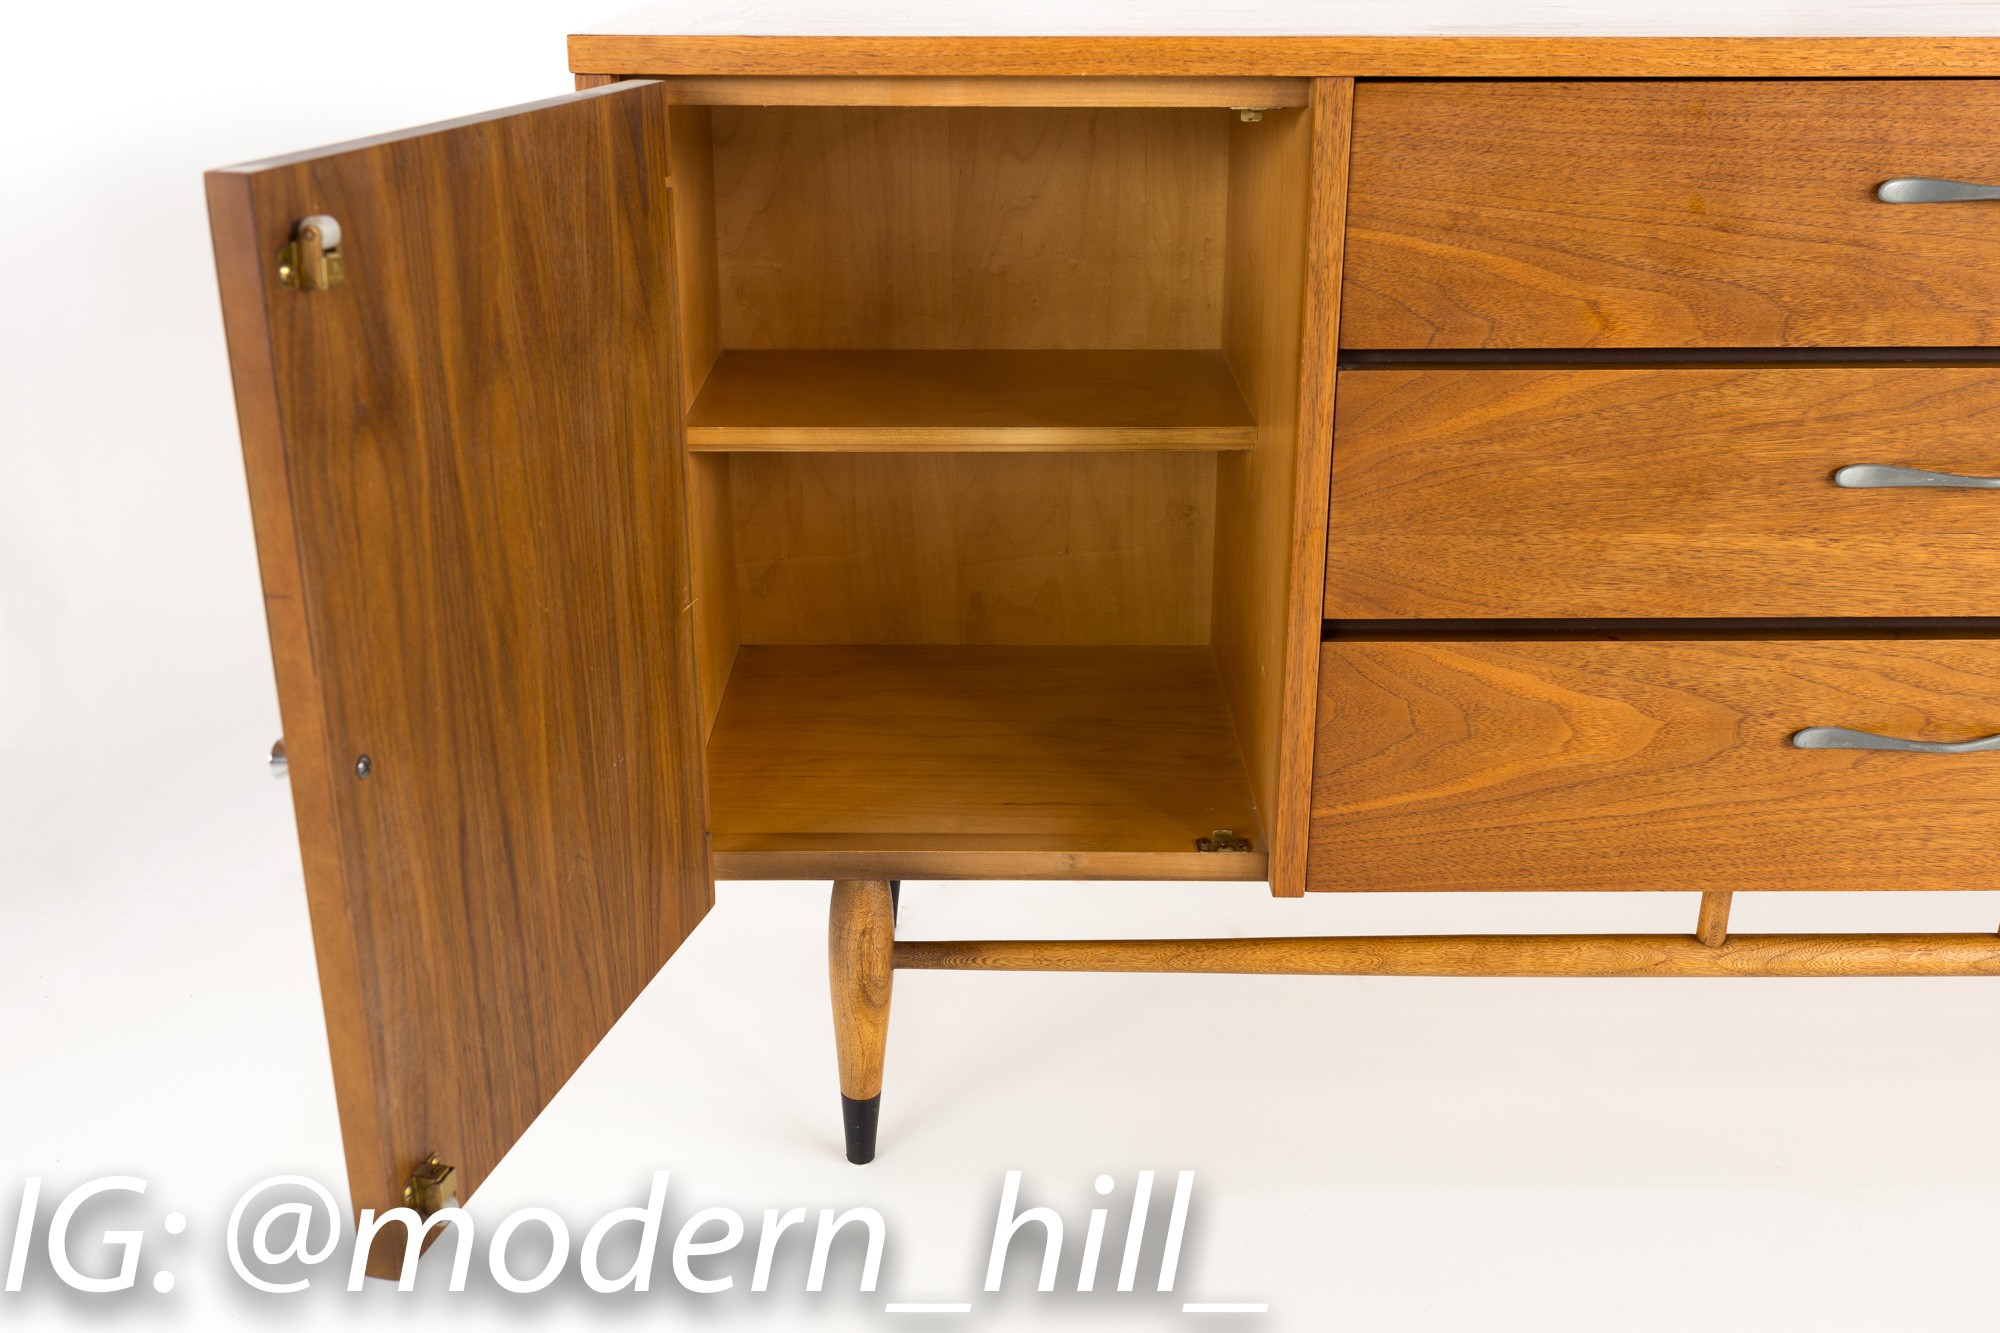 Andre Bus for Lane Acclaim Mid Century Walnut Dovetail Sideboard Credenza Buffet